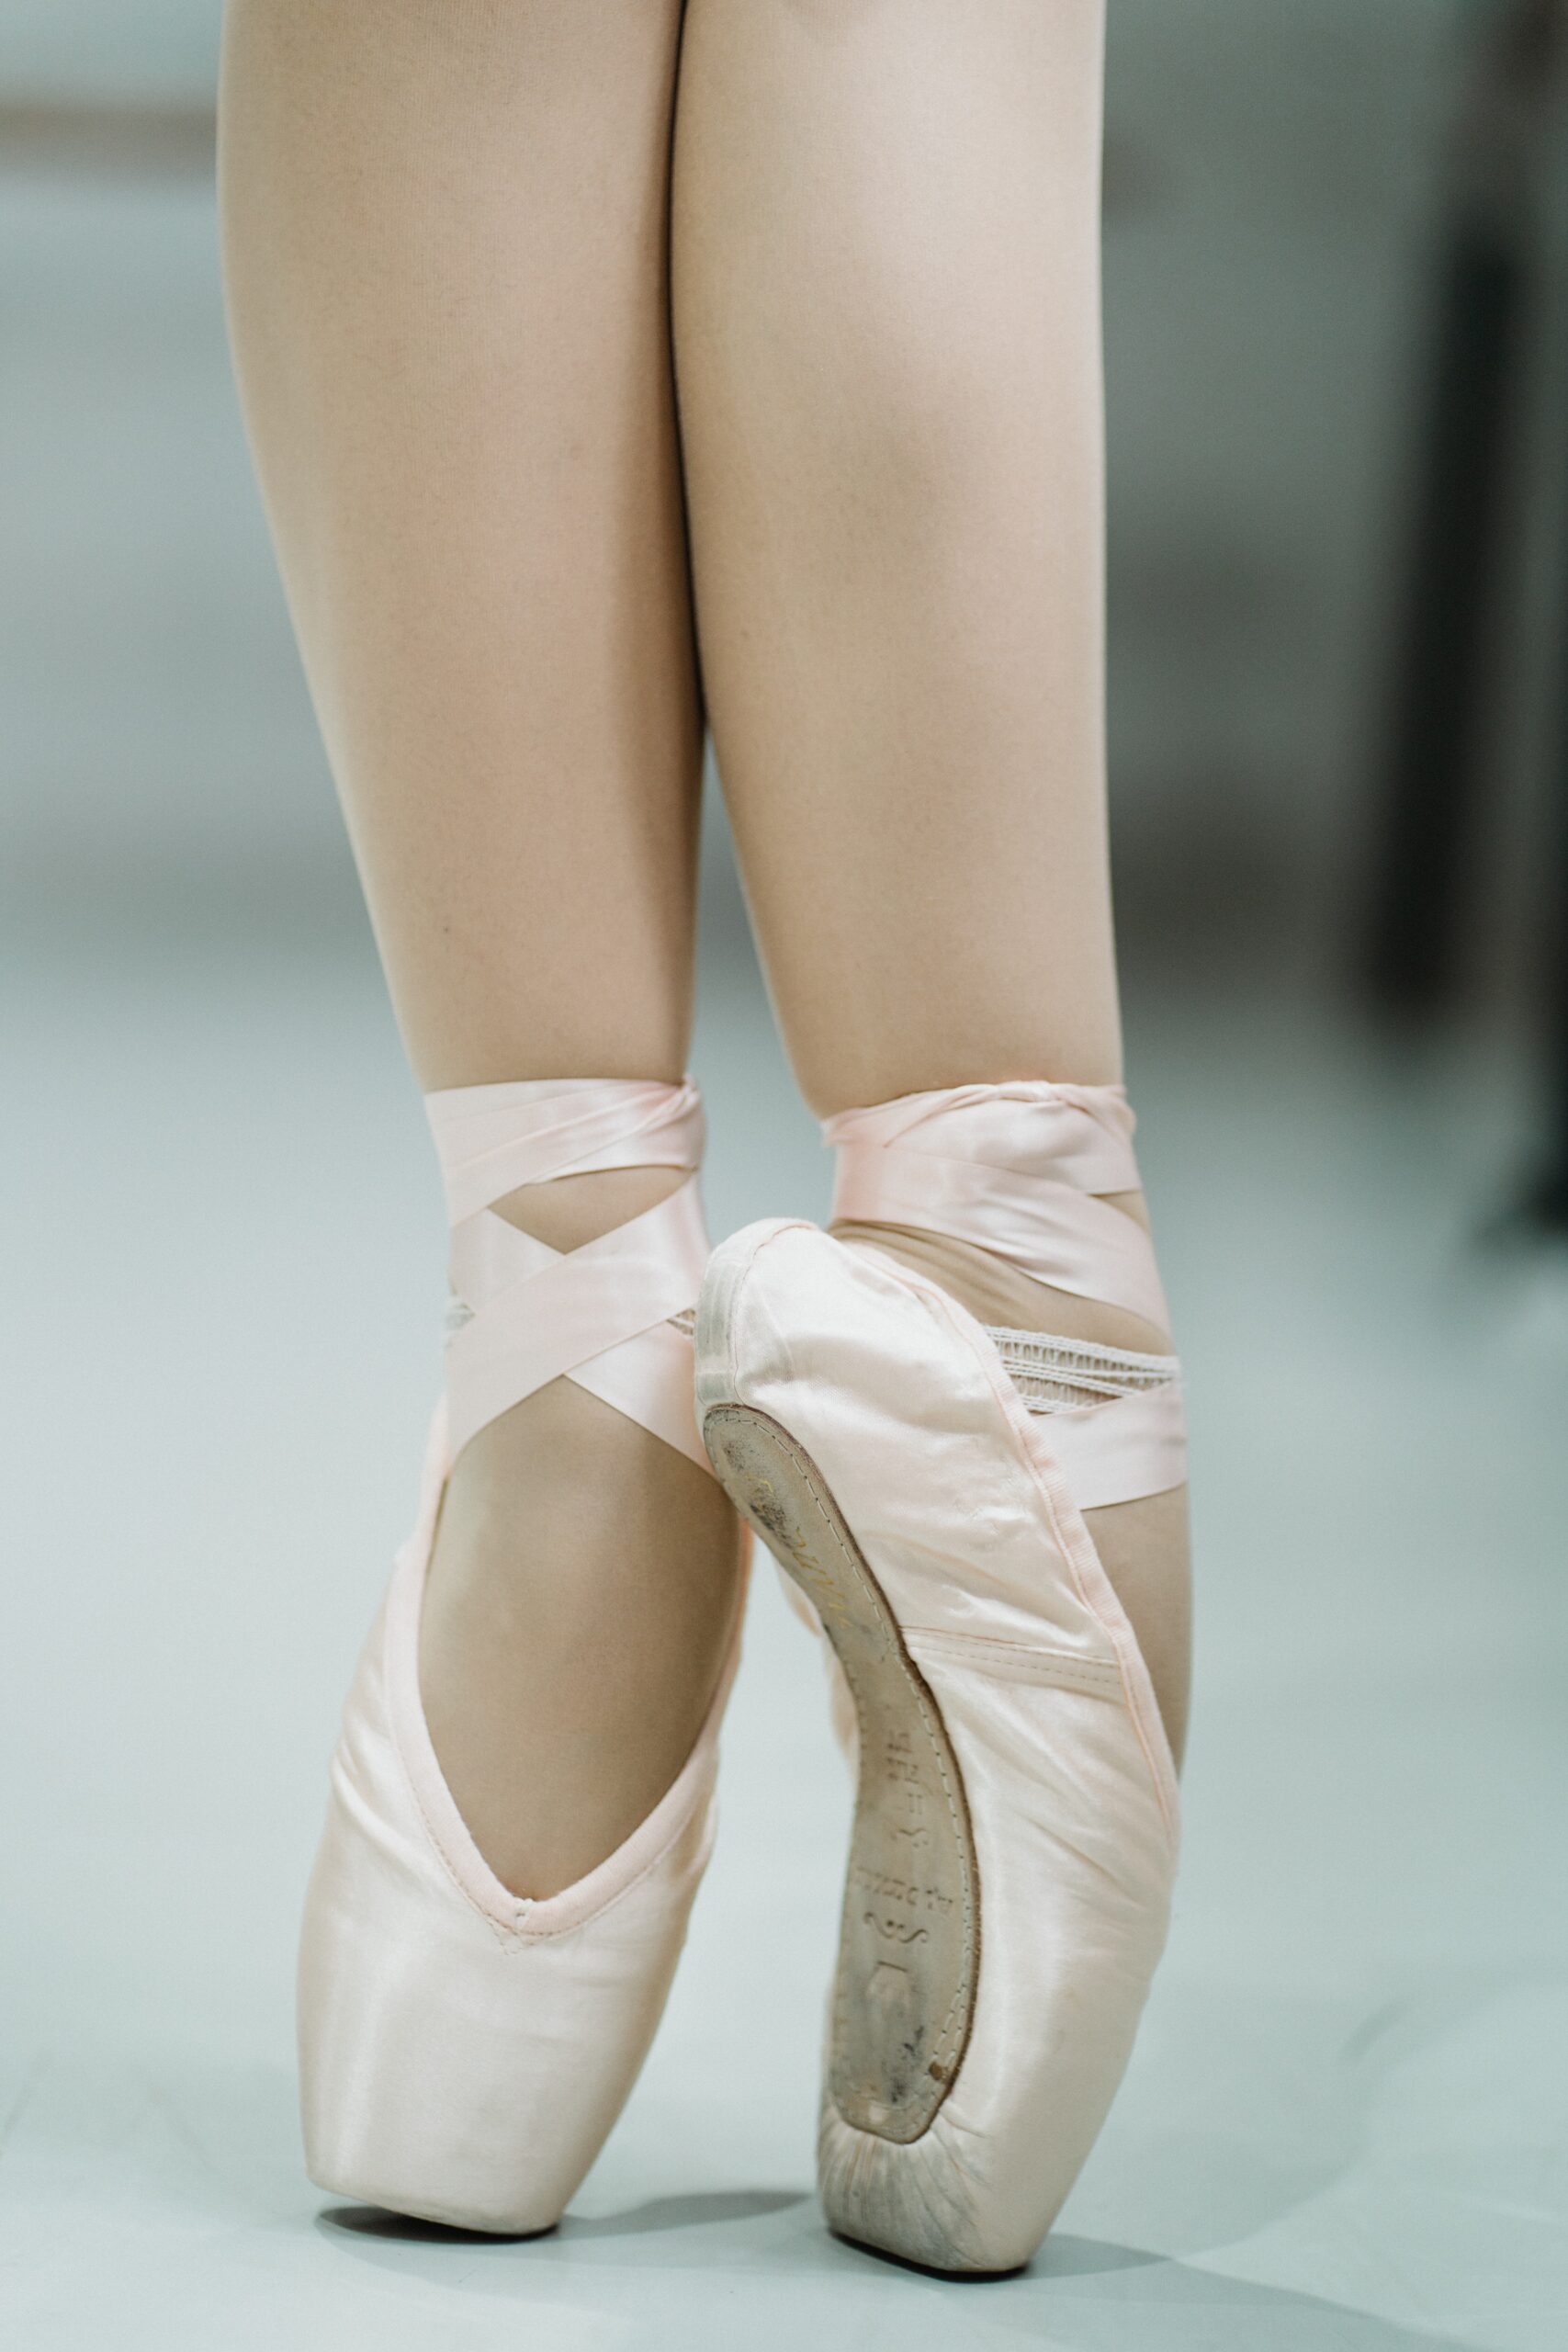 ballet shoes being worn and ballet pose close up of feet